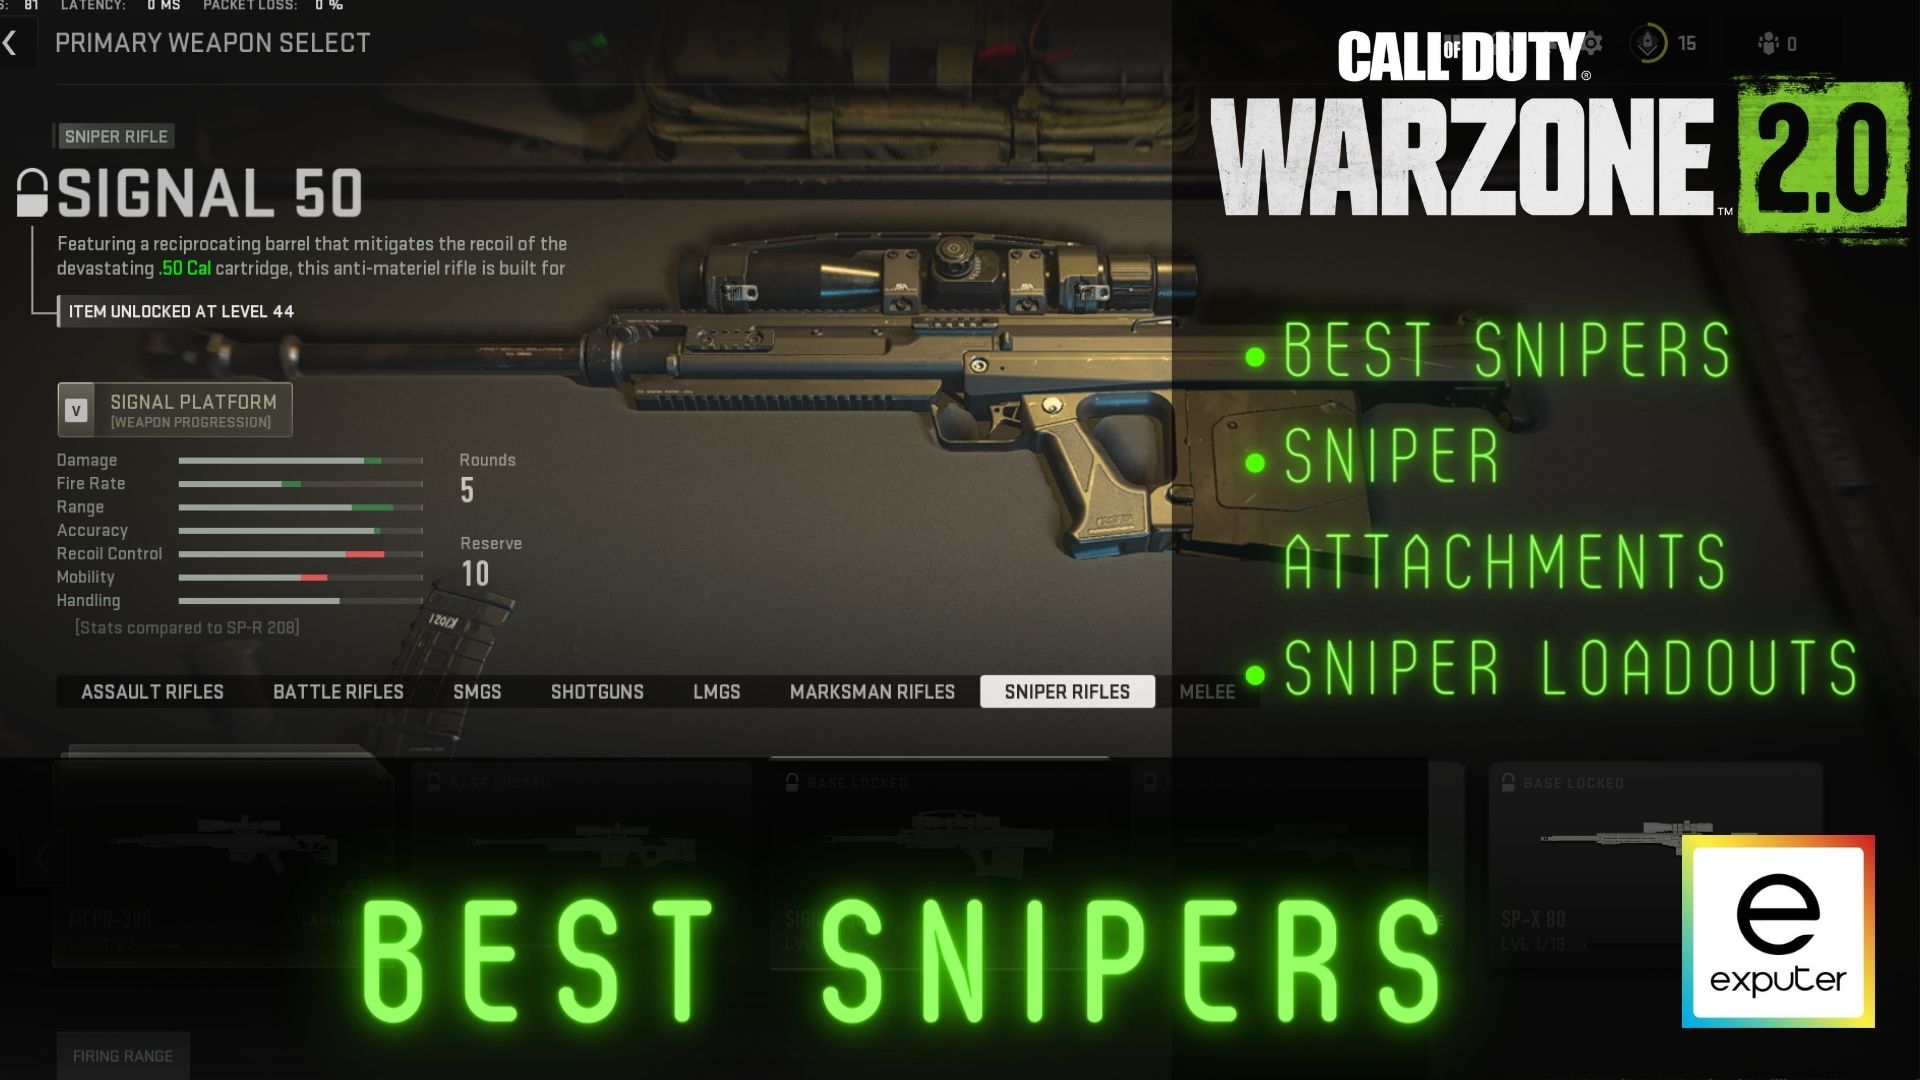 Best Snipers COD Warzone 2.0